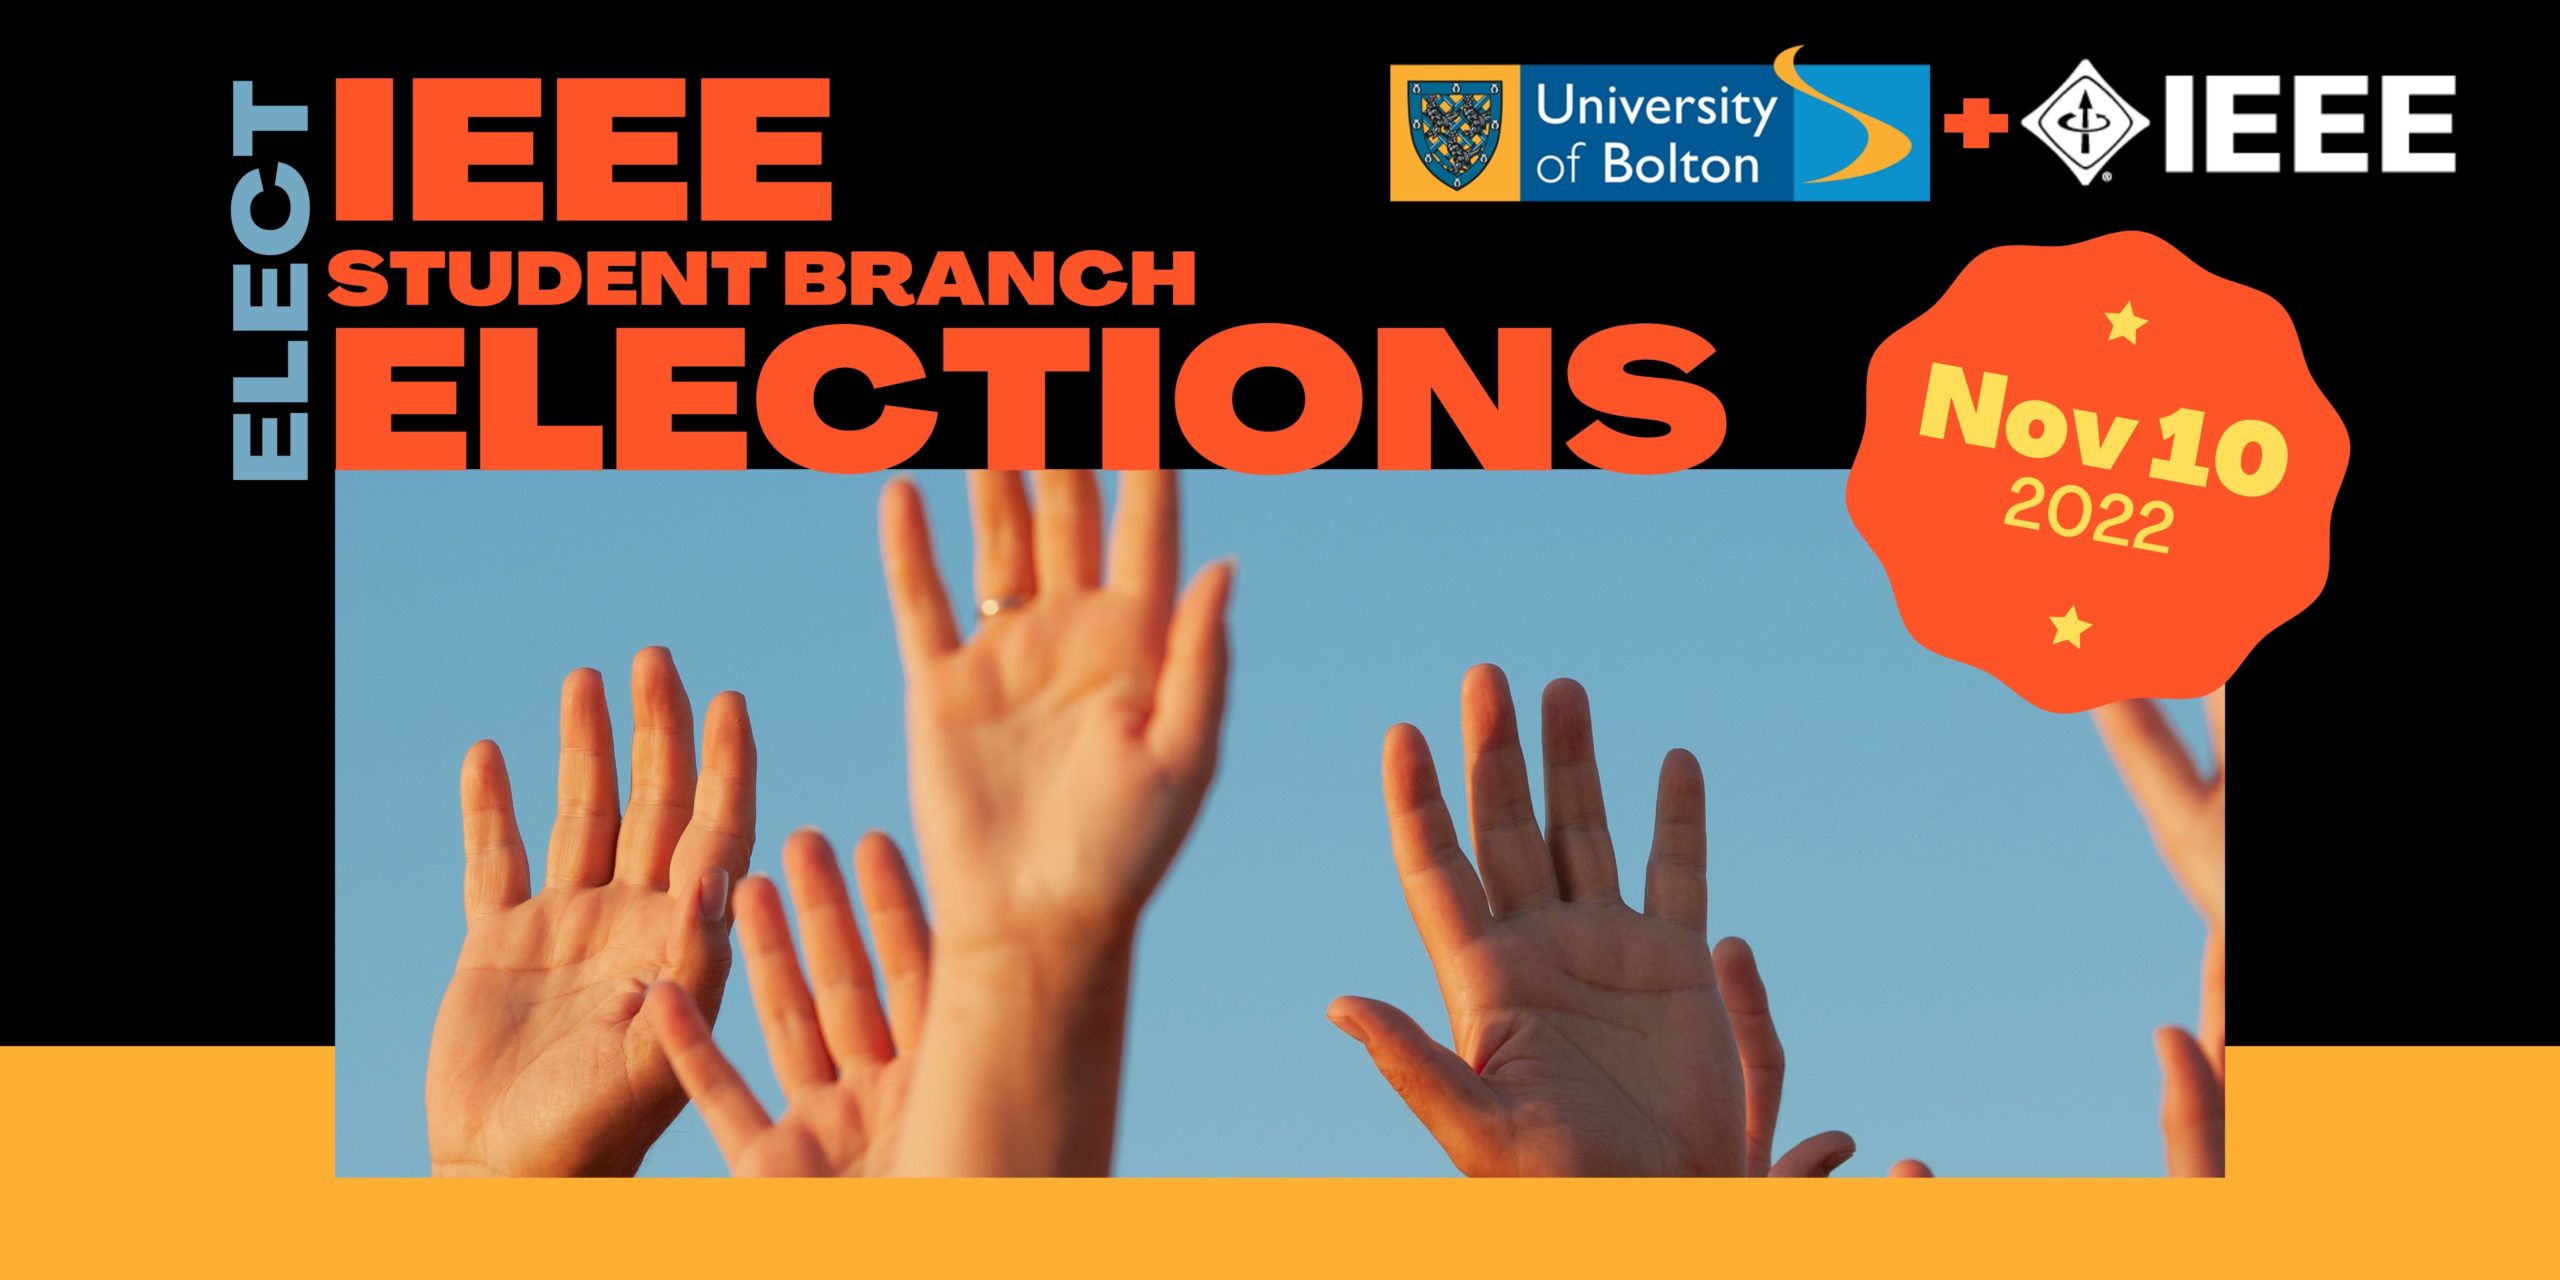 University of Bolton IEEE Student Branch Elections 2022 Poster